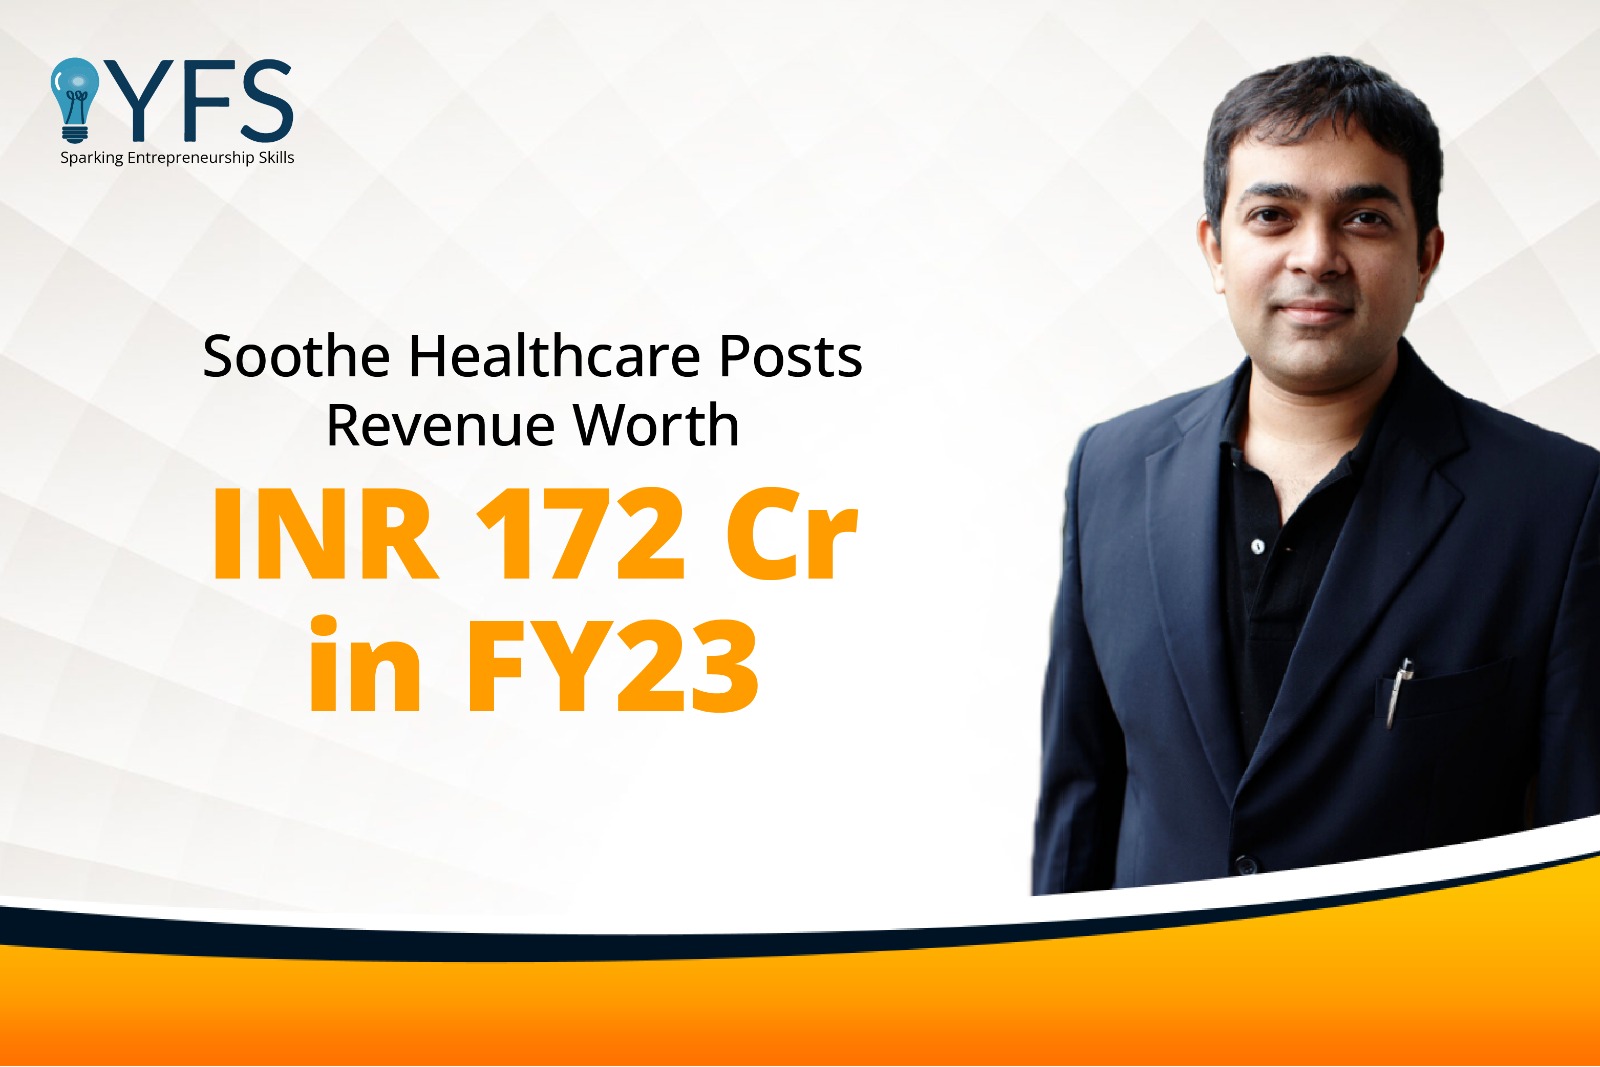 Soothe Healthcare Posts Revenue Worth INR 172 Cr in FY23